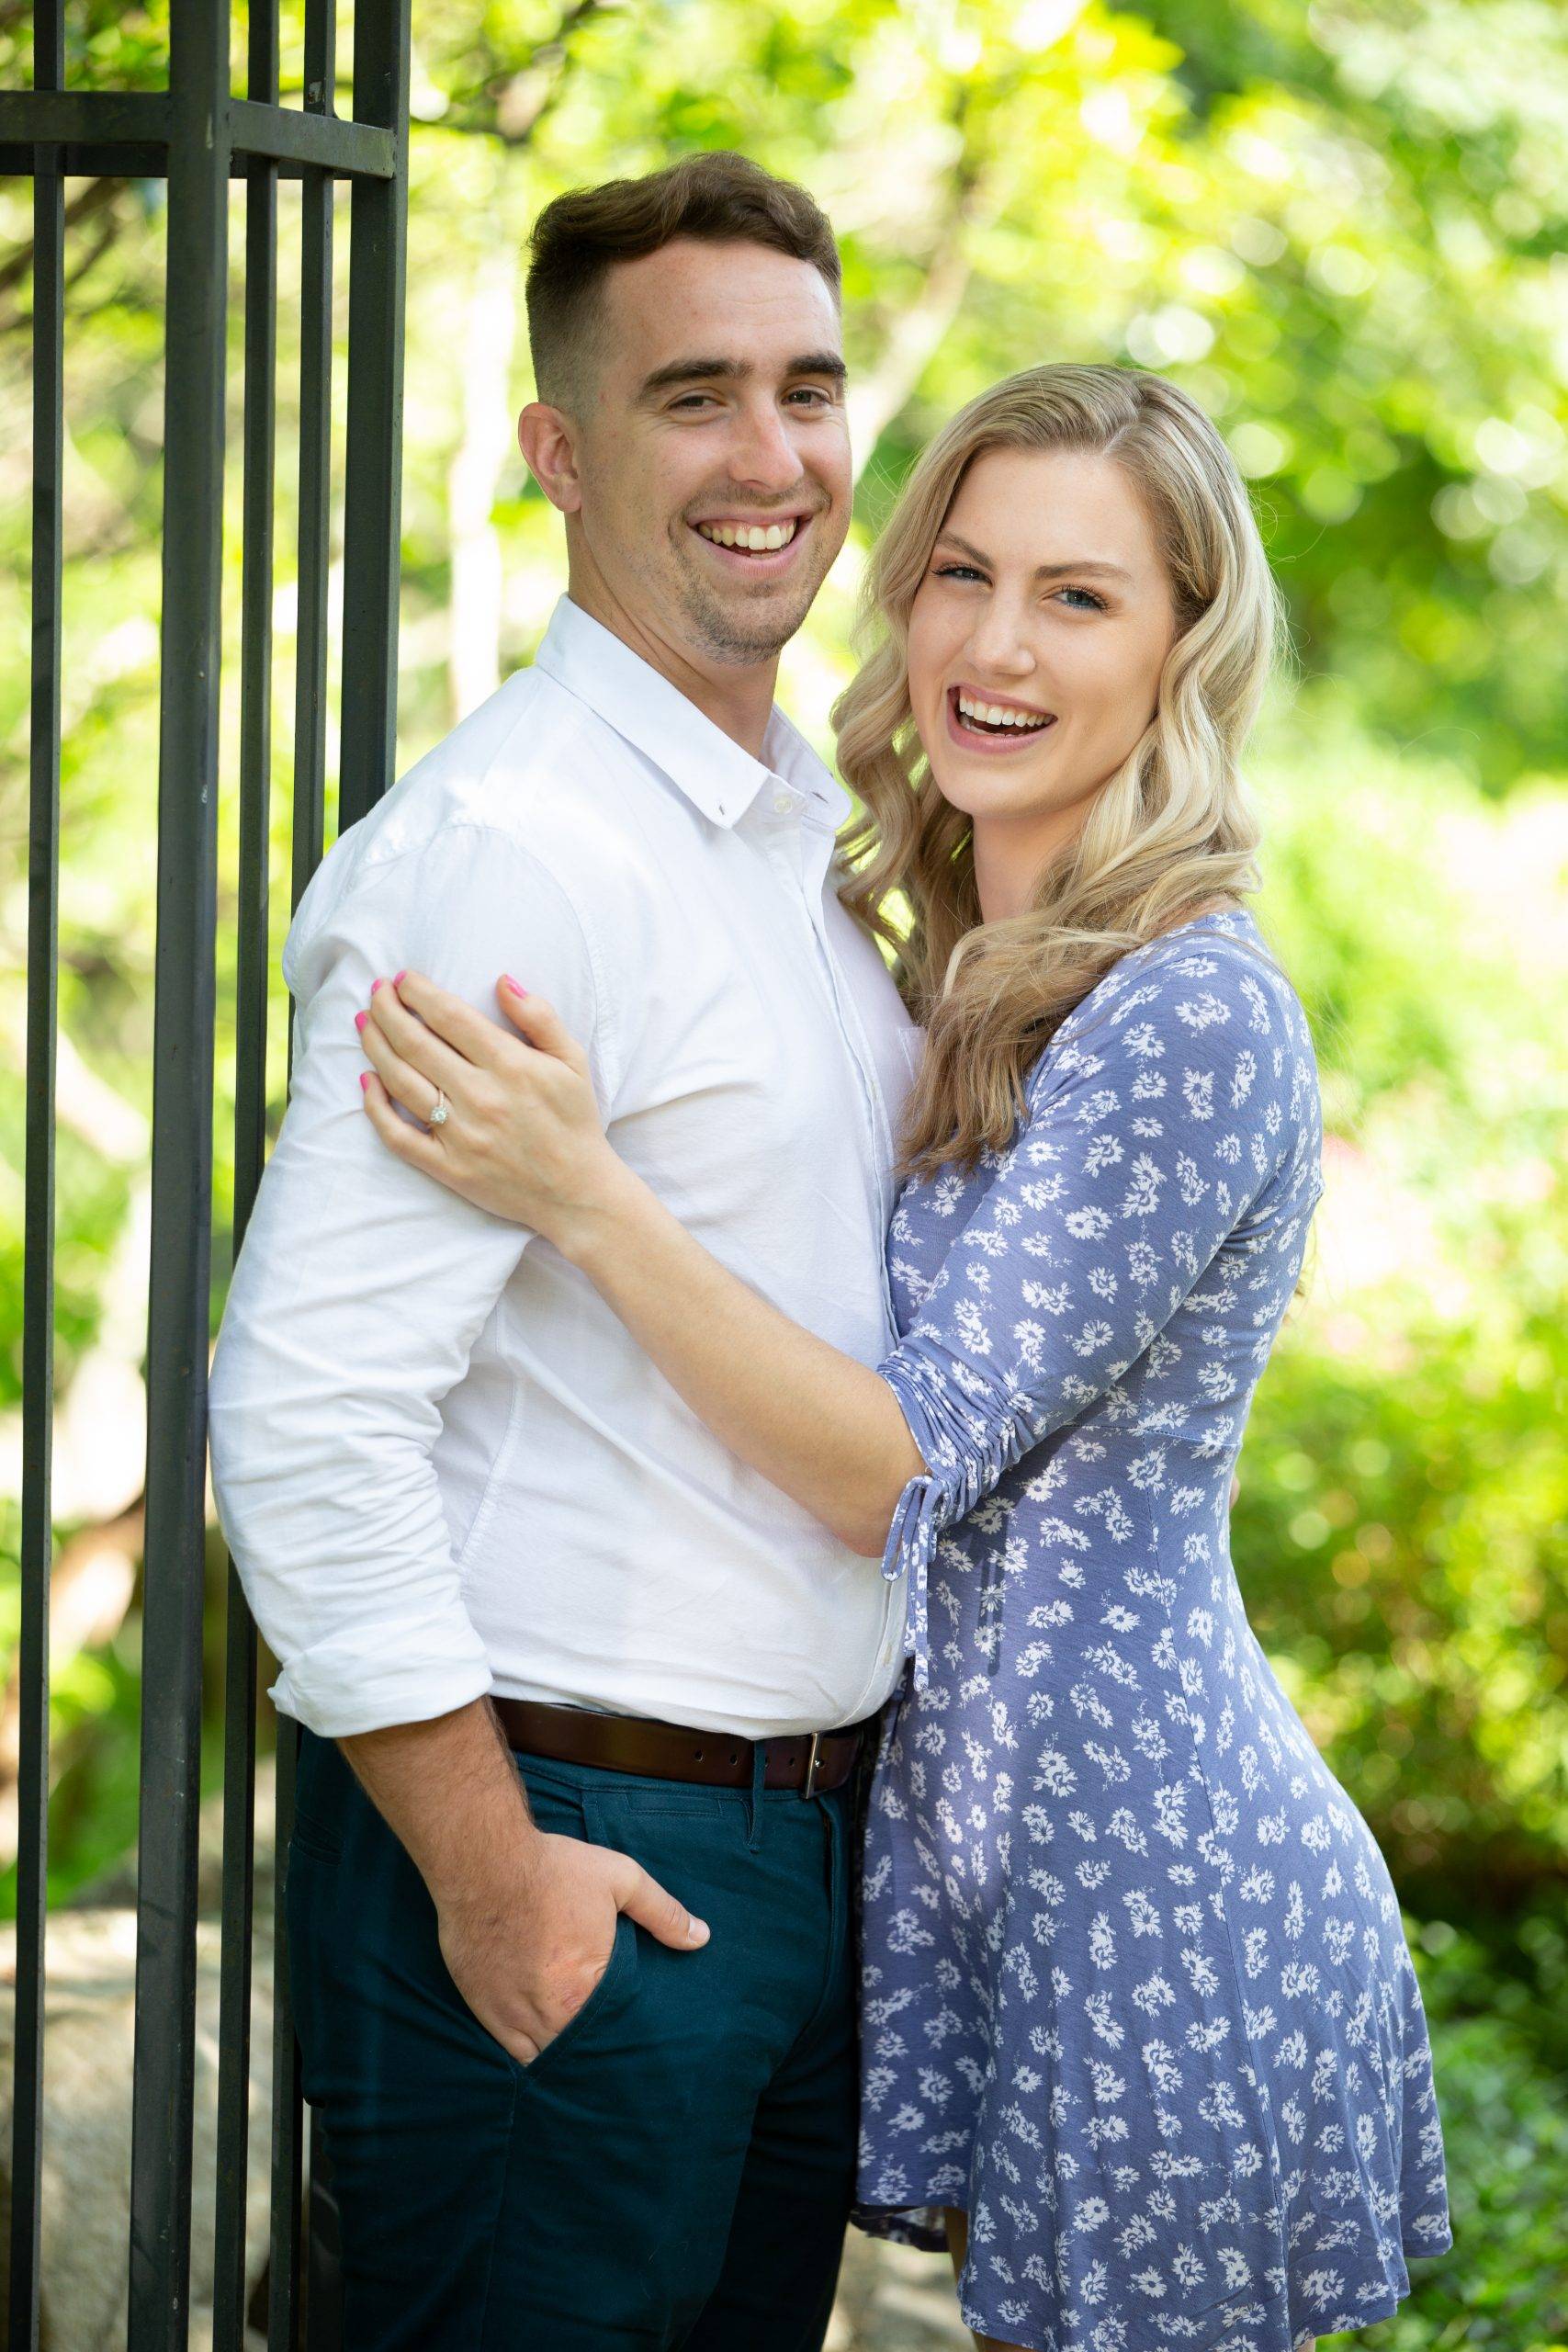 A couple posing in front of a fence in a park.